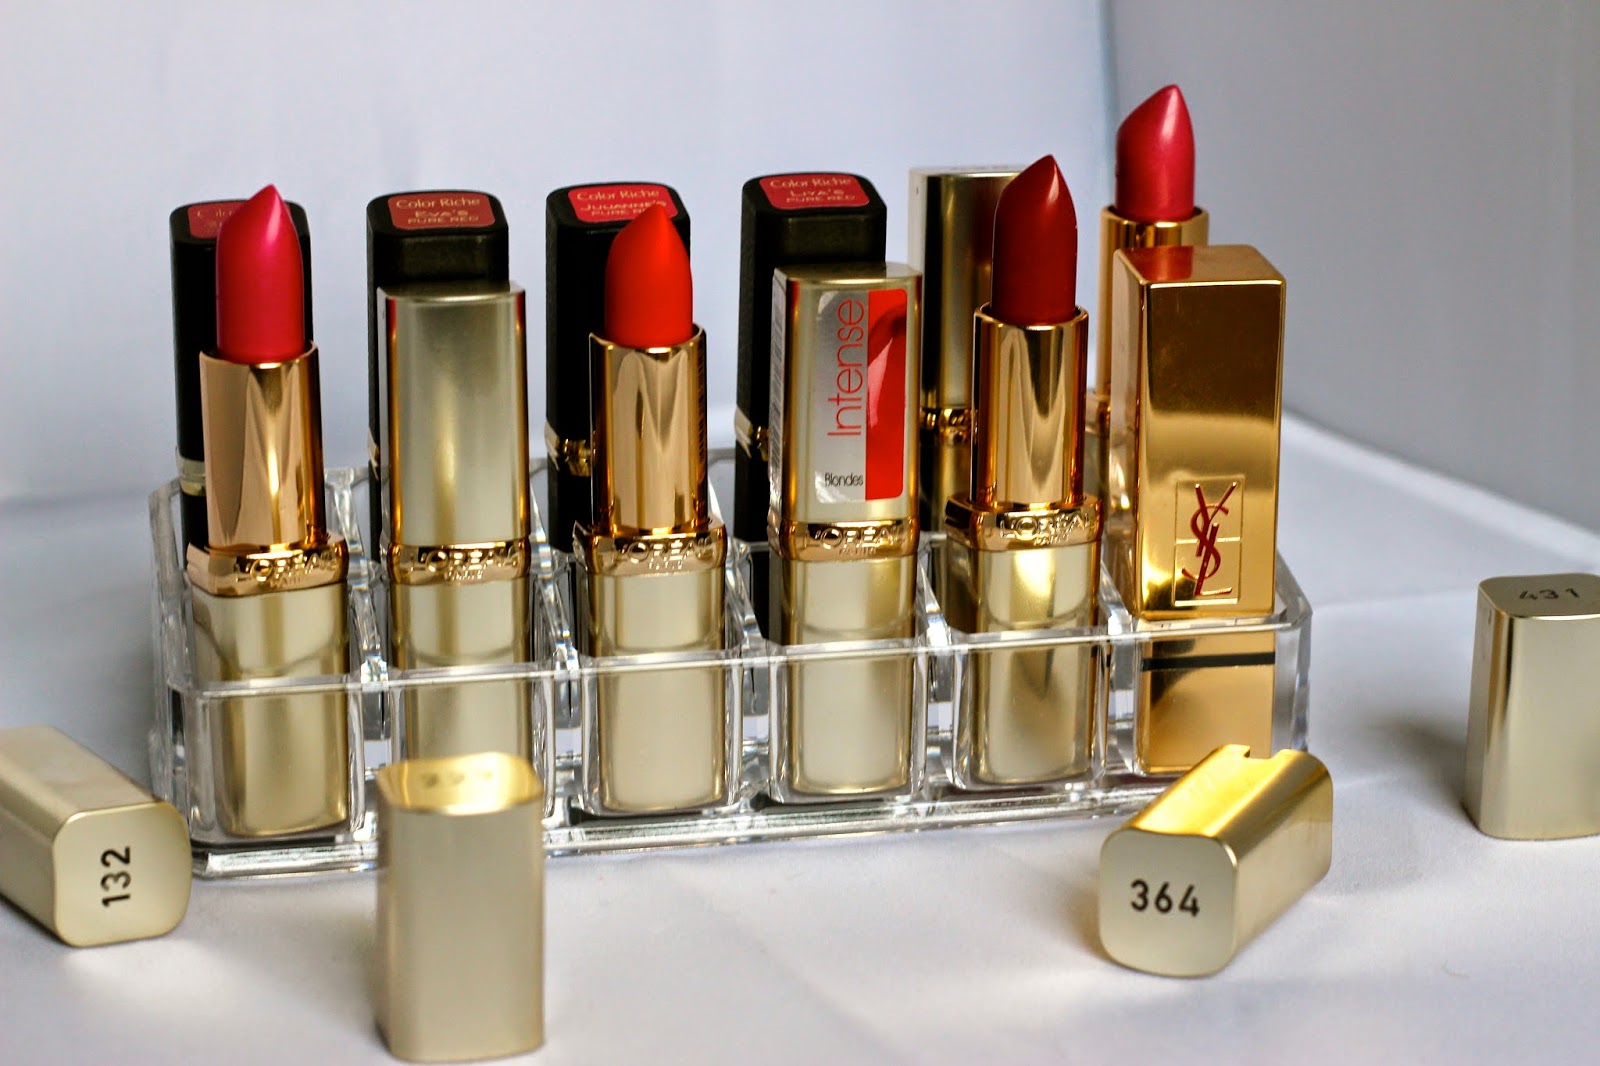 L’oreal lipstick collection